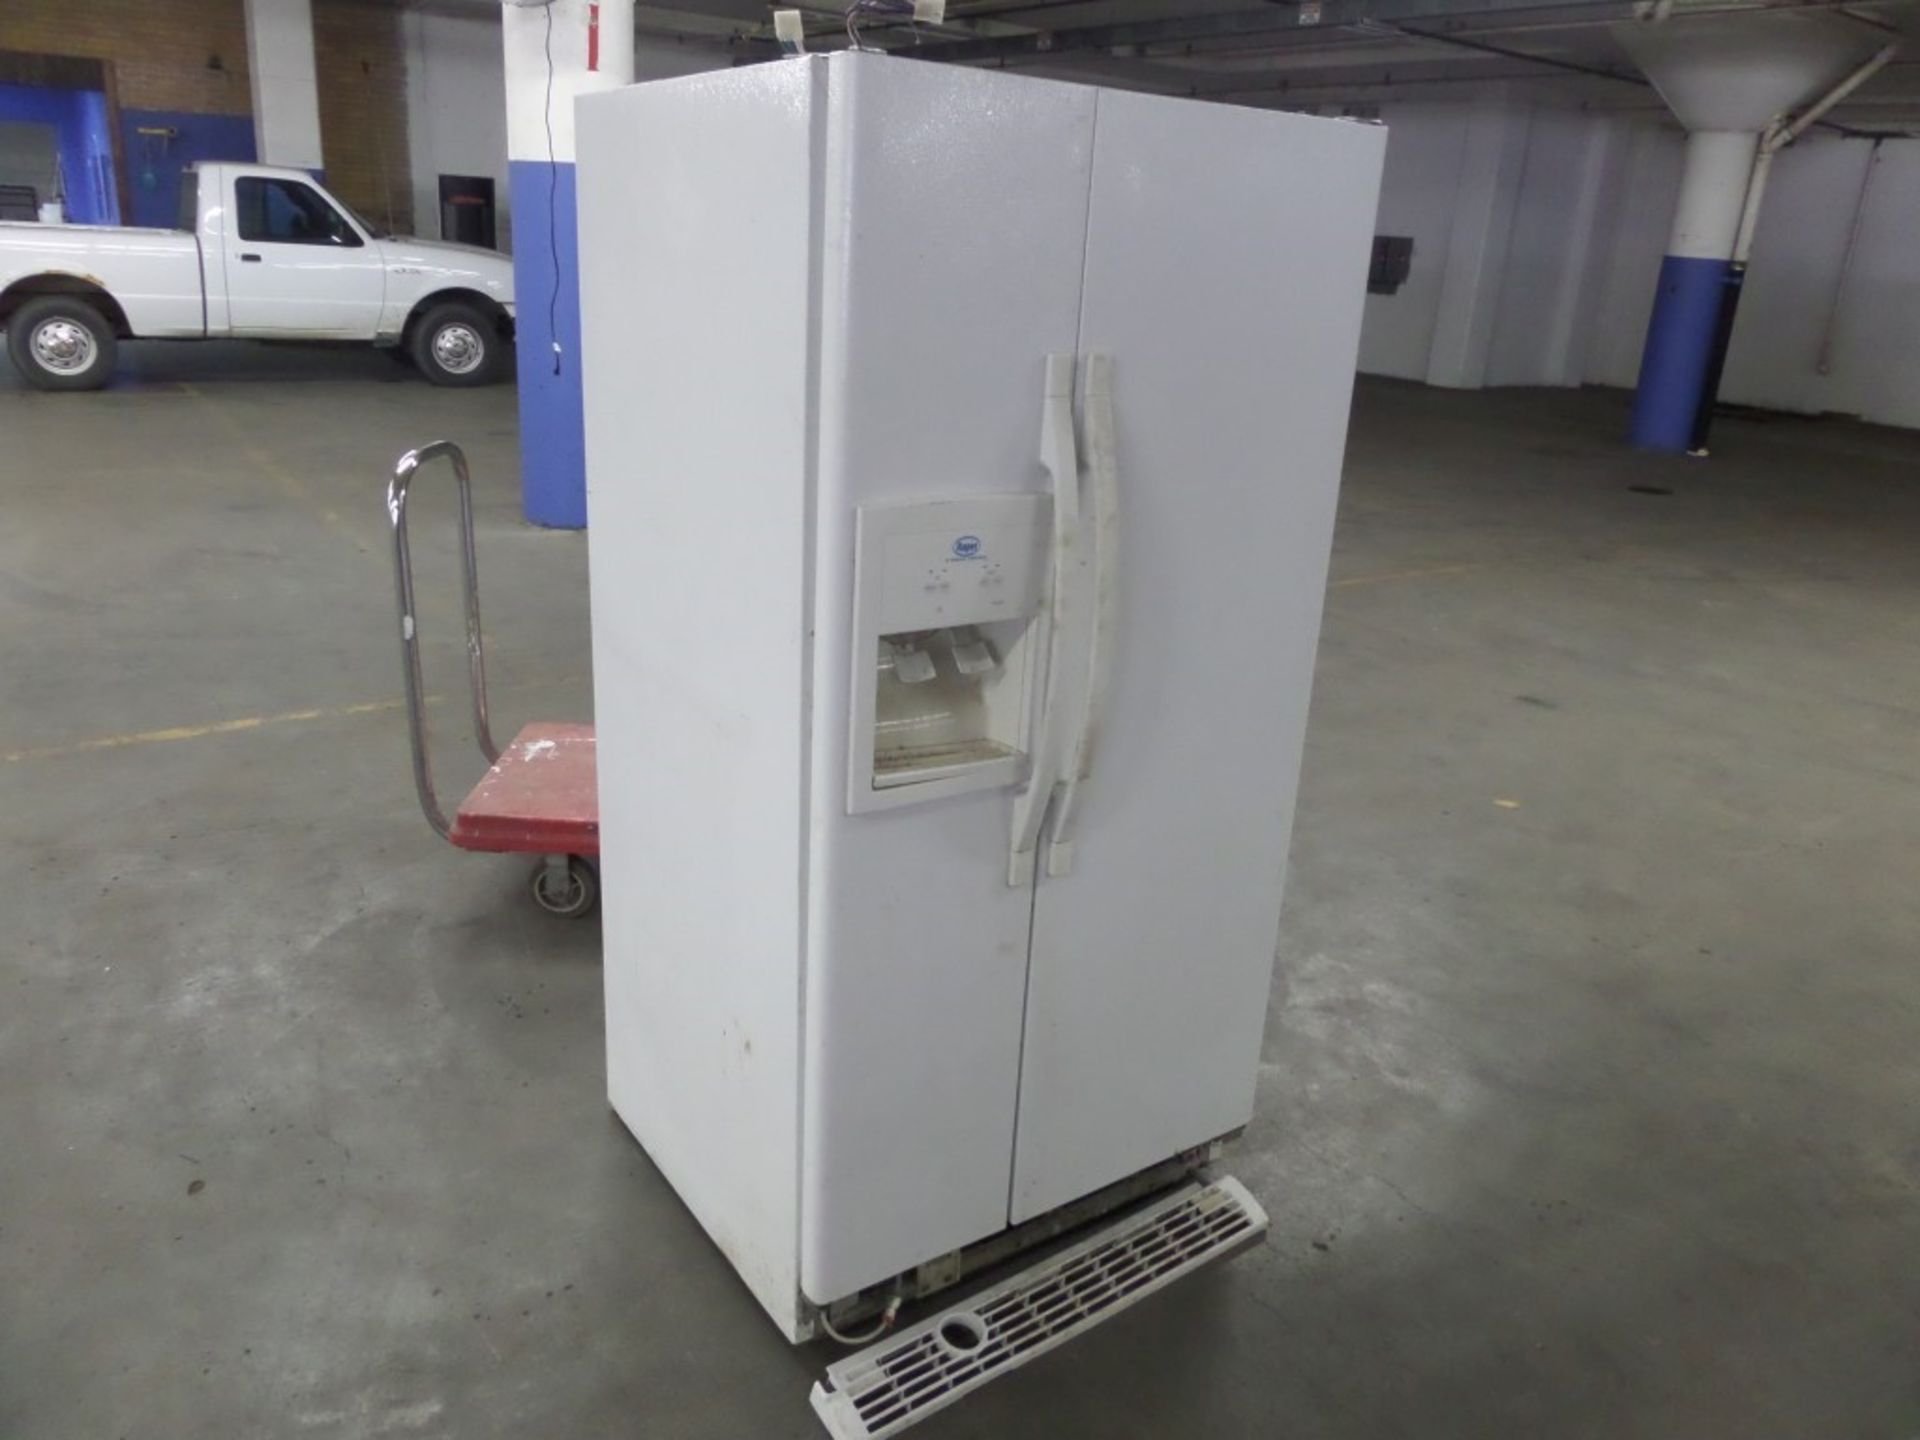 Roper Side-by-side refrigerator - Needs Cleaning